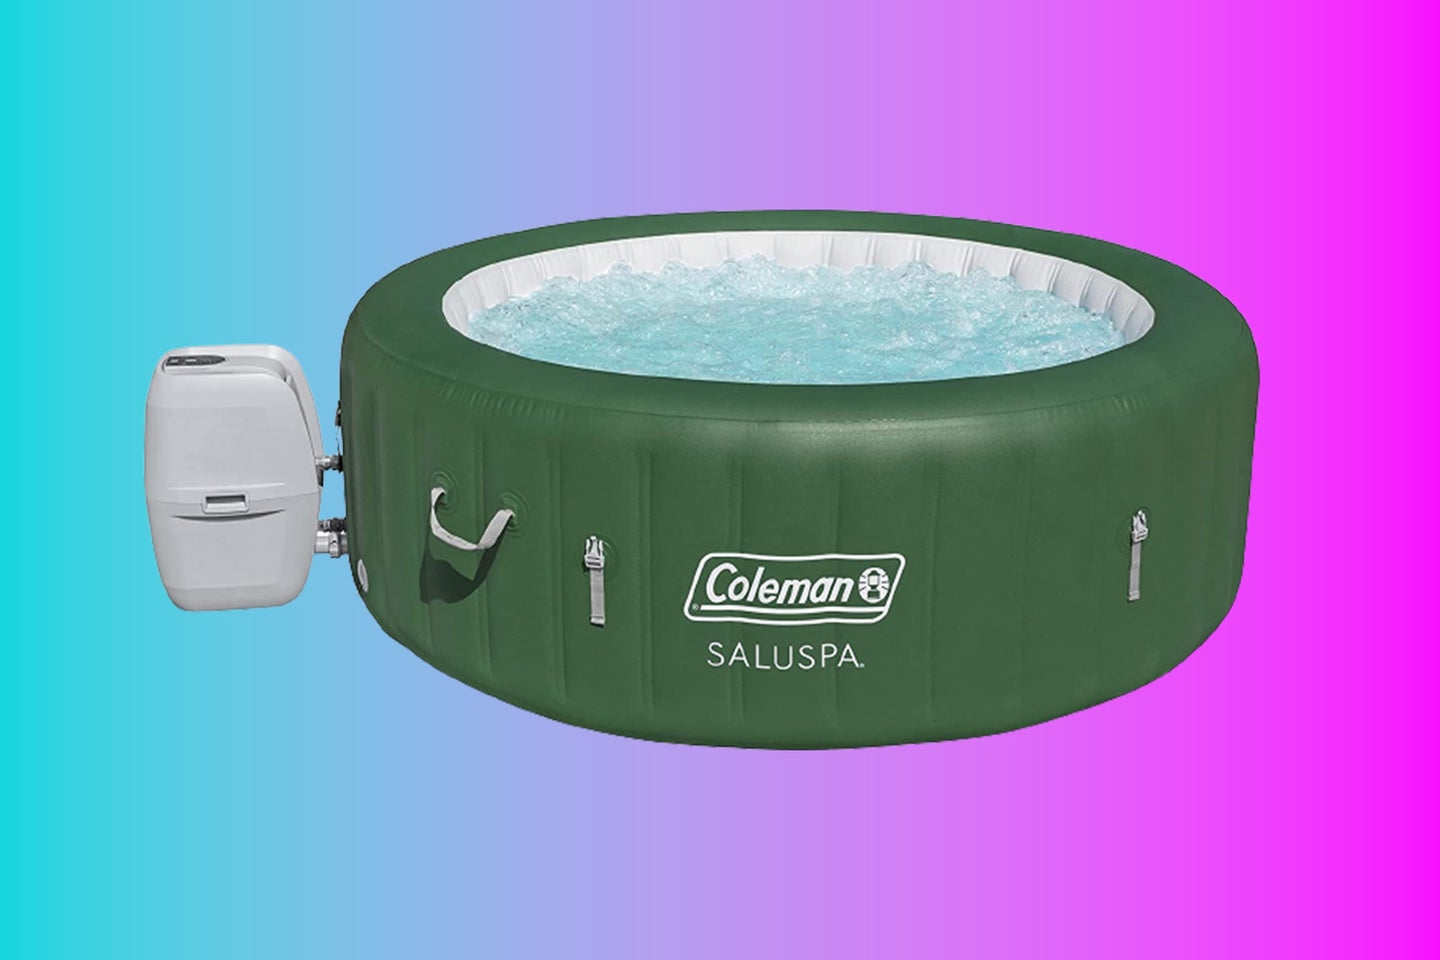 A Coleman SaluSpa hot tub against a blue and pink gradient background.